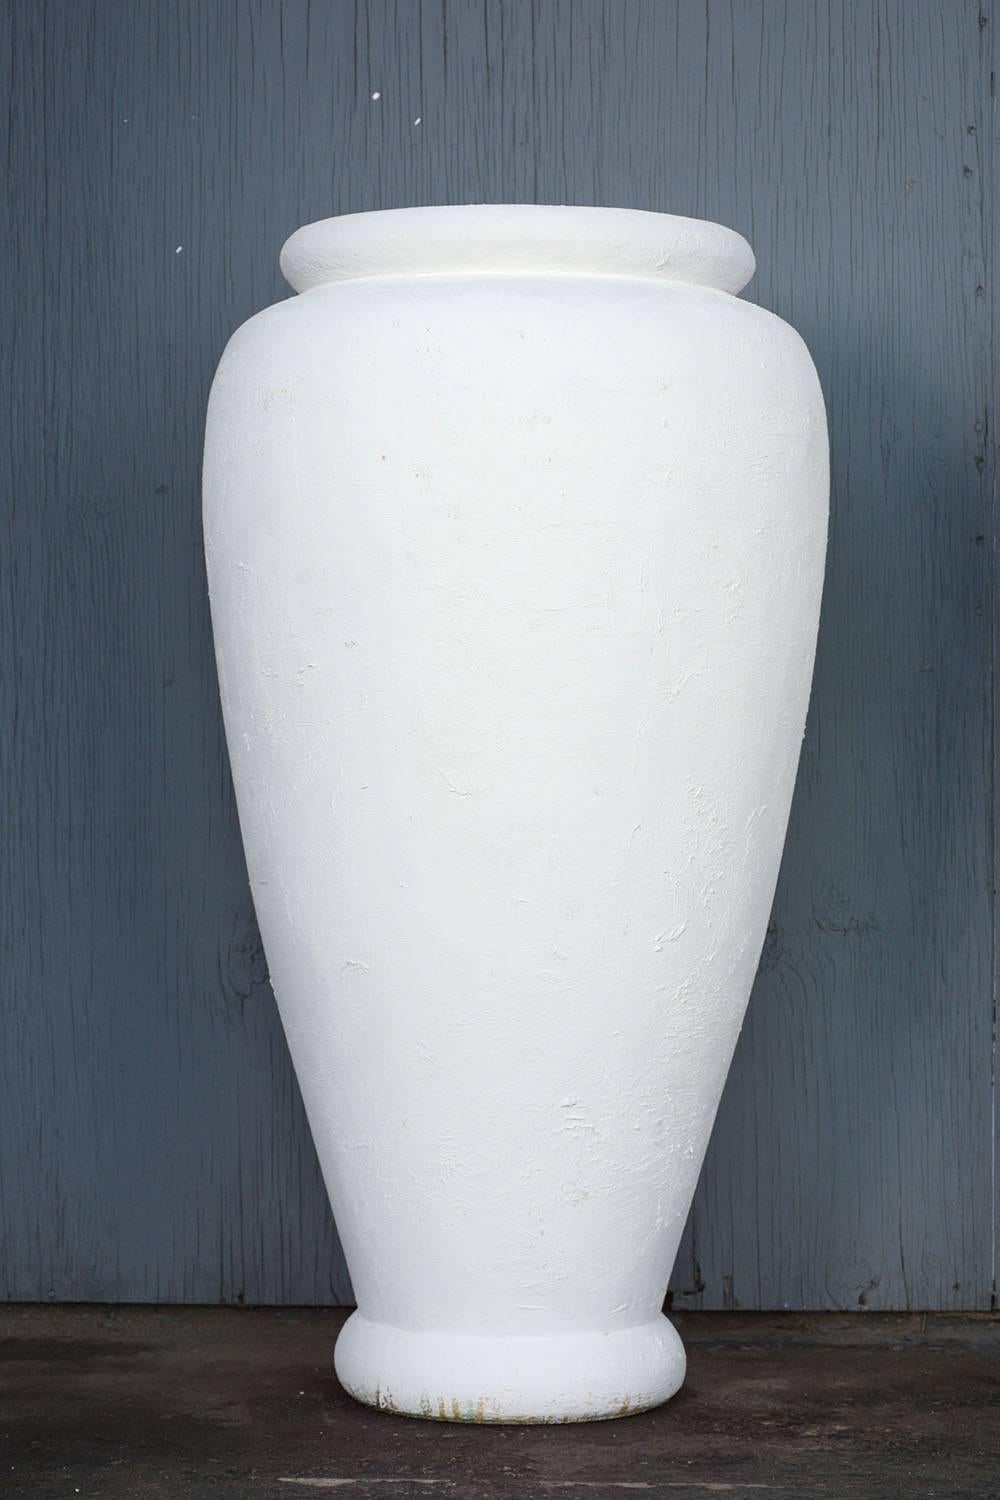 This pair of 1980's Traditional-style patio urns are made from concrete painted an off-white color with a matte finish. The understated profile of the urns is reminiscent of classical Grecian pottery. This pair of patio urns are sturdy, timeless,